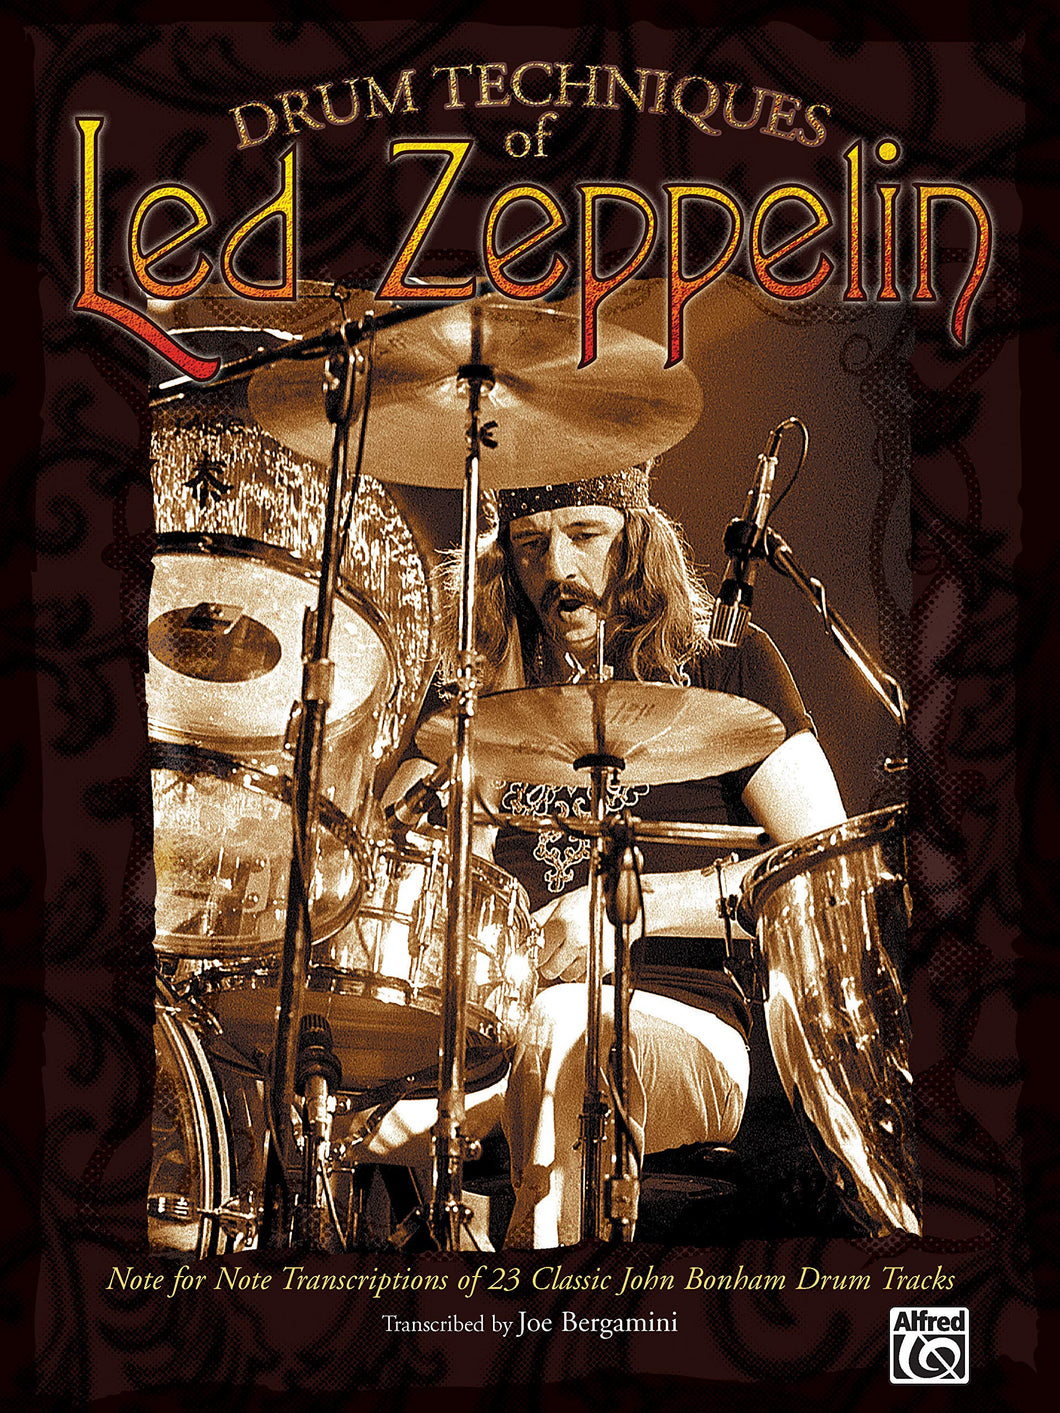 Nobody's Fault but Mine - Led Zeppelin - Collection of Drum Transcriptions / Drum Sheet Music - Alfred Music DTLZNFNT